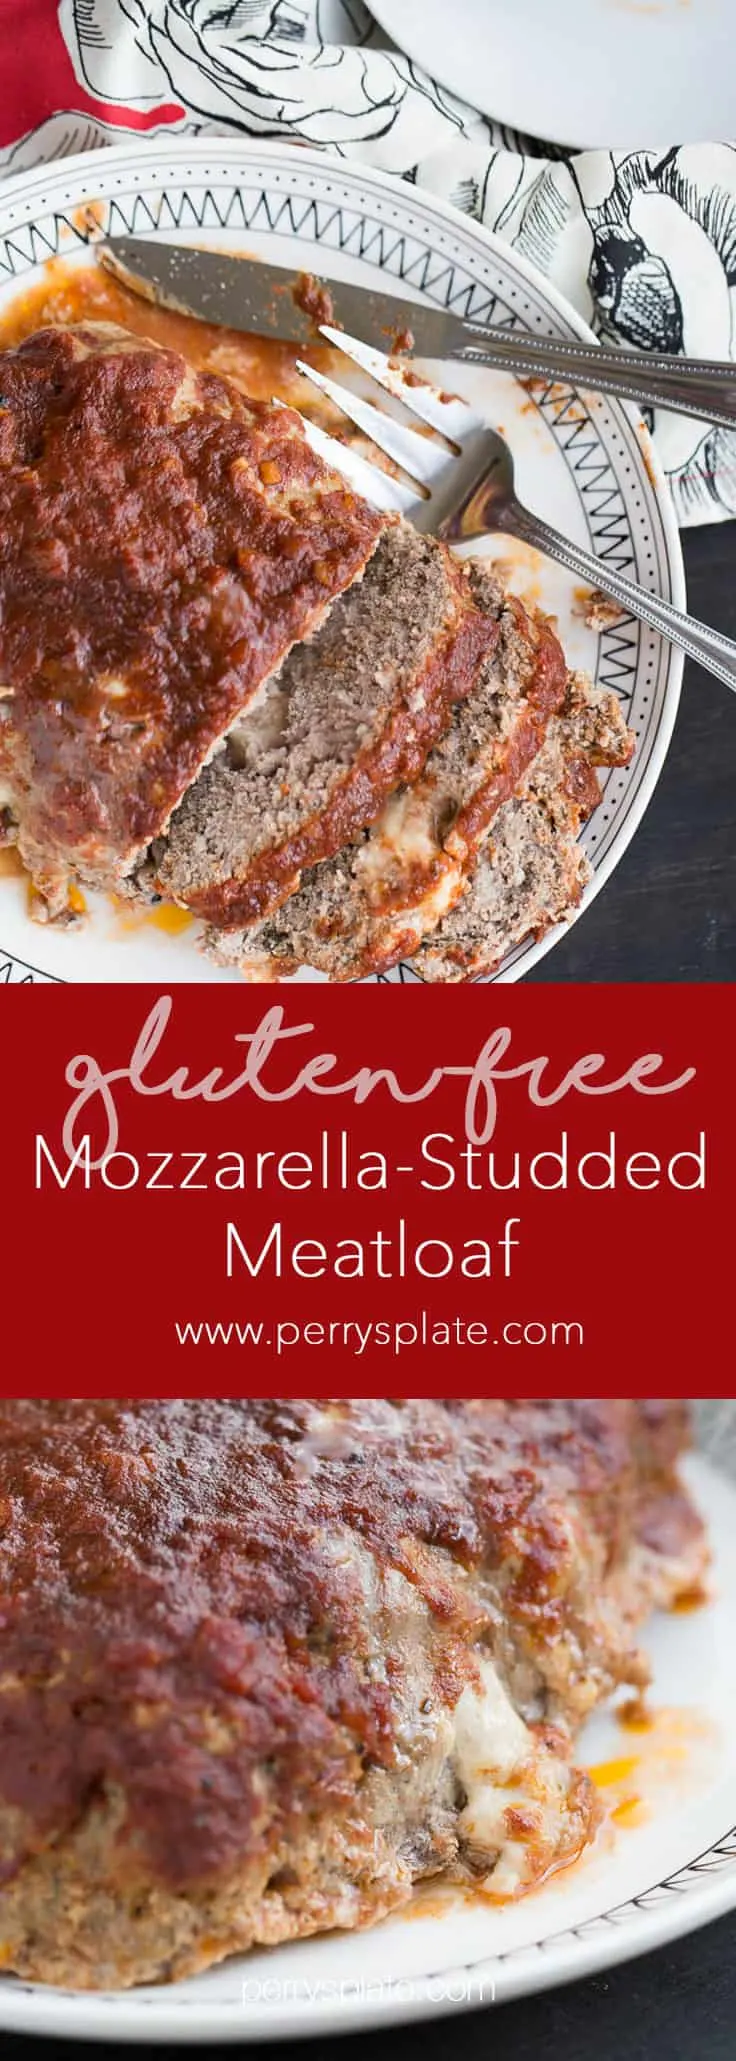 Favorite side dishes for meatloaf! | Gluten-free recipes | Paleo recipes | Easy side dishes | perrysplate.com